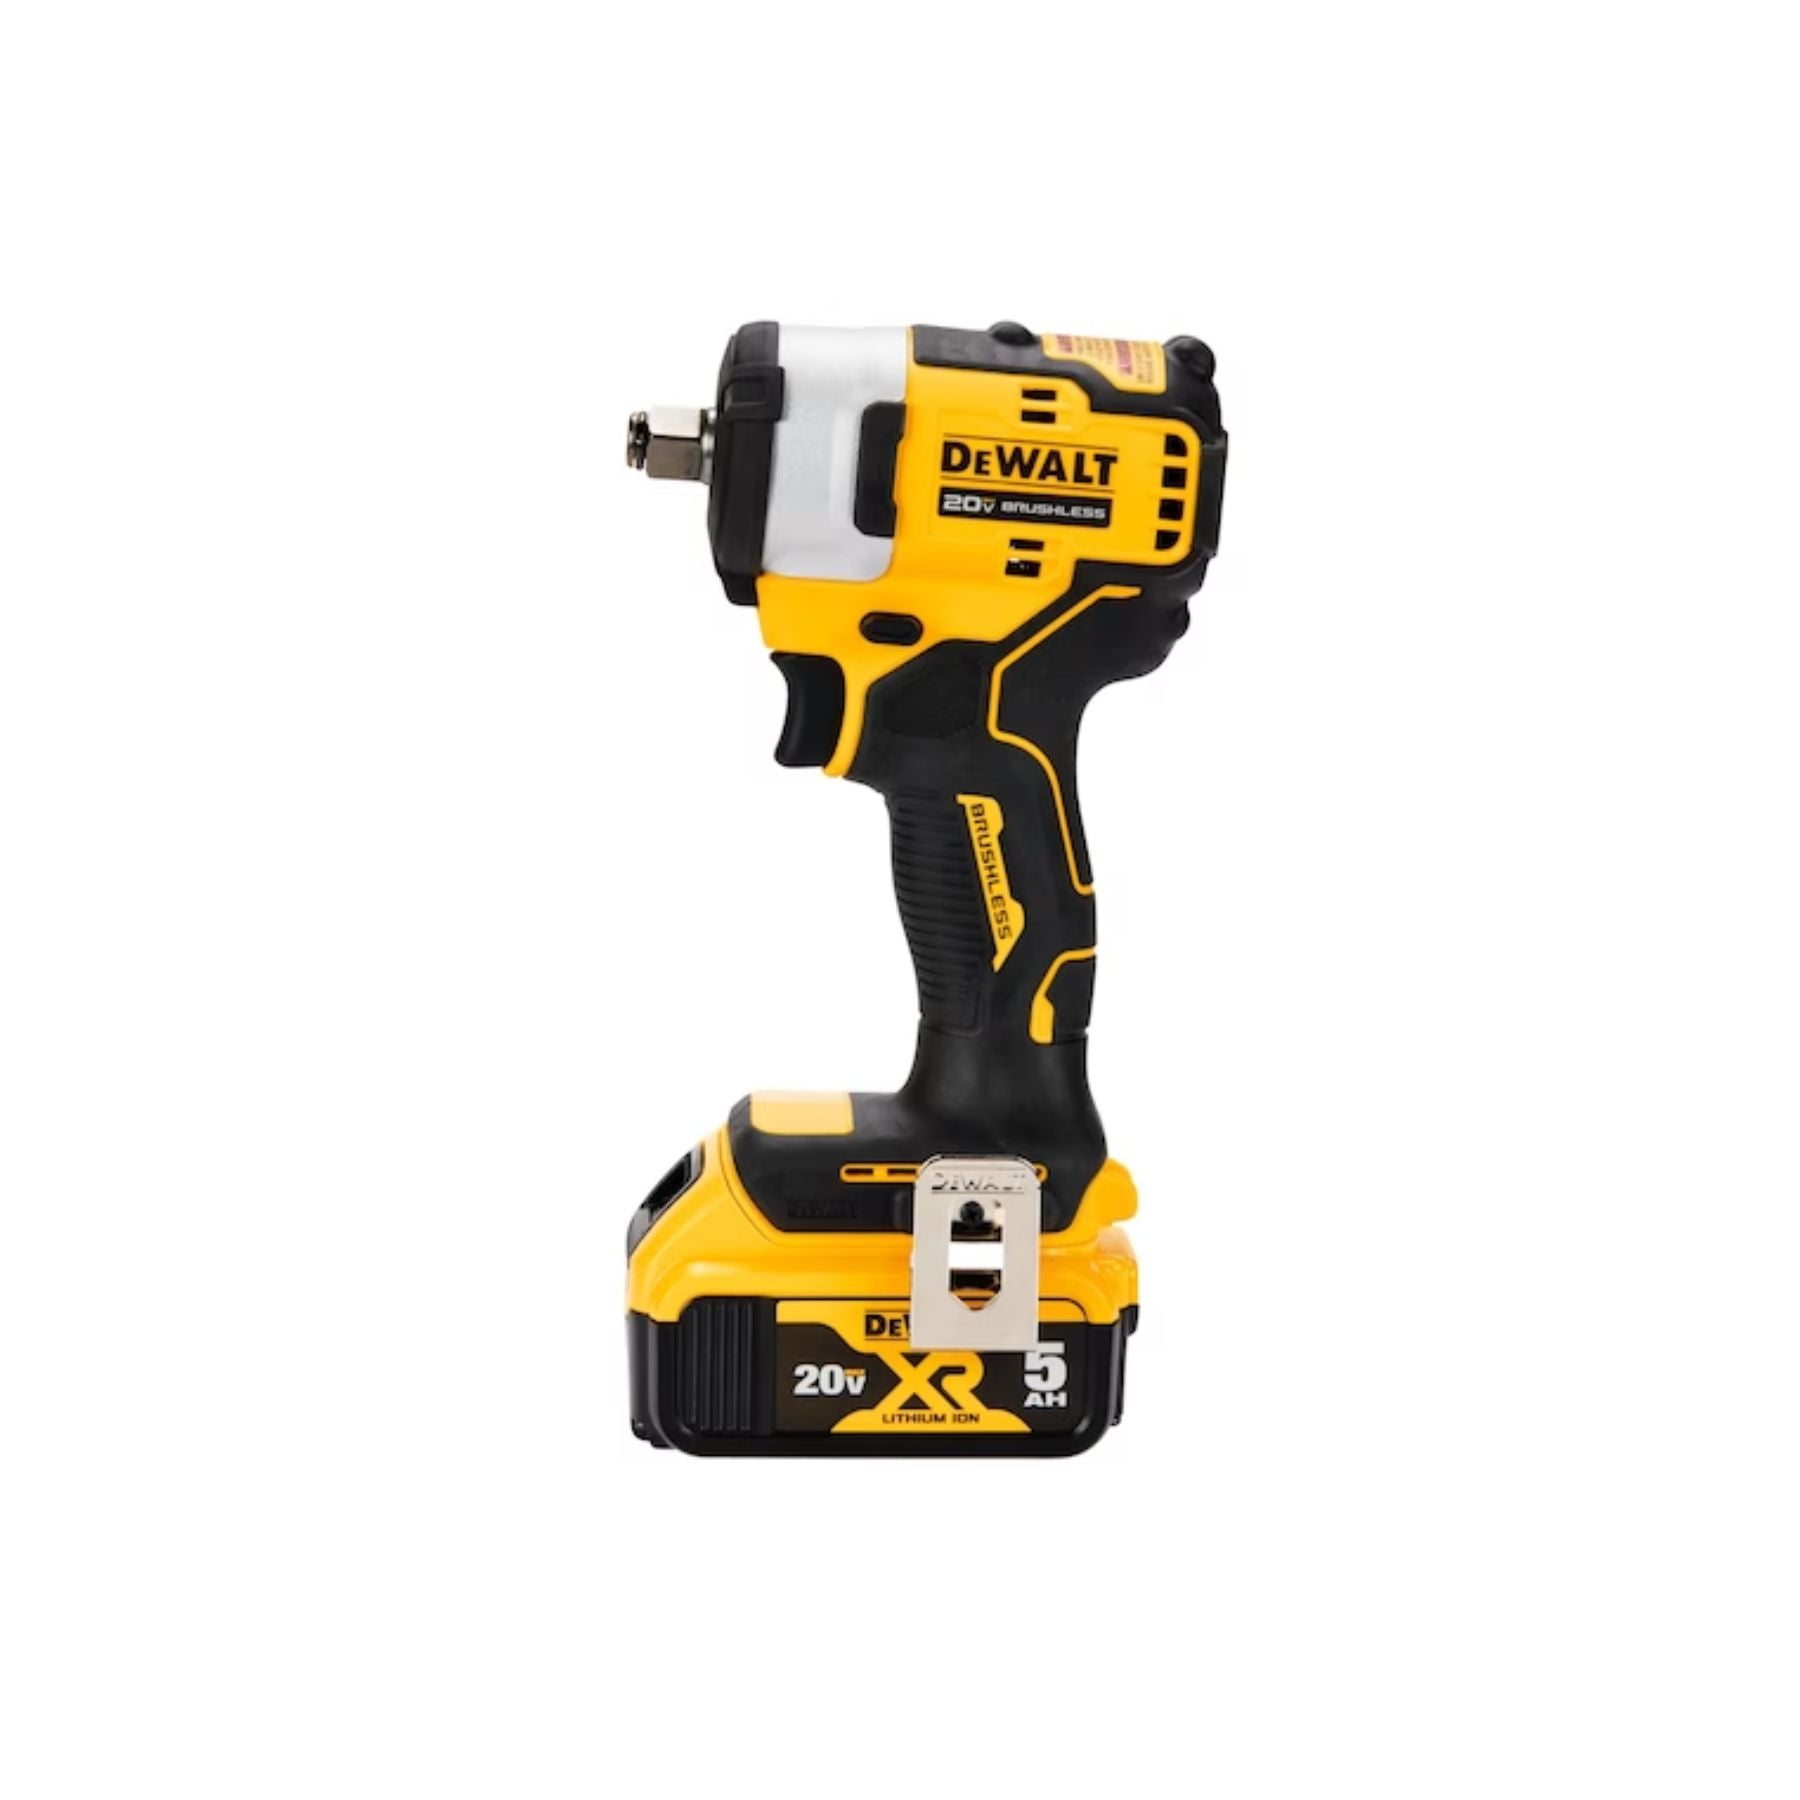 Dewalt (DCF911P2) 20V MAX* 1/2 in. Cordless Impact Wrench